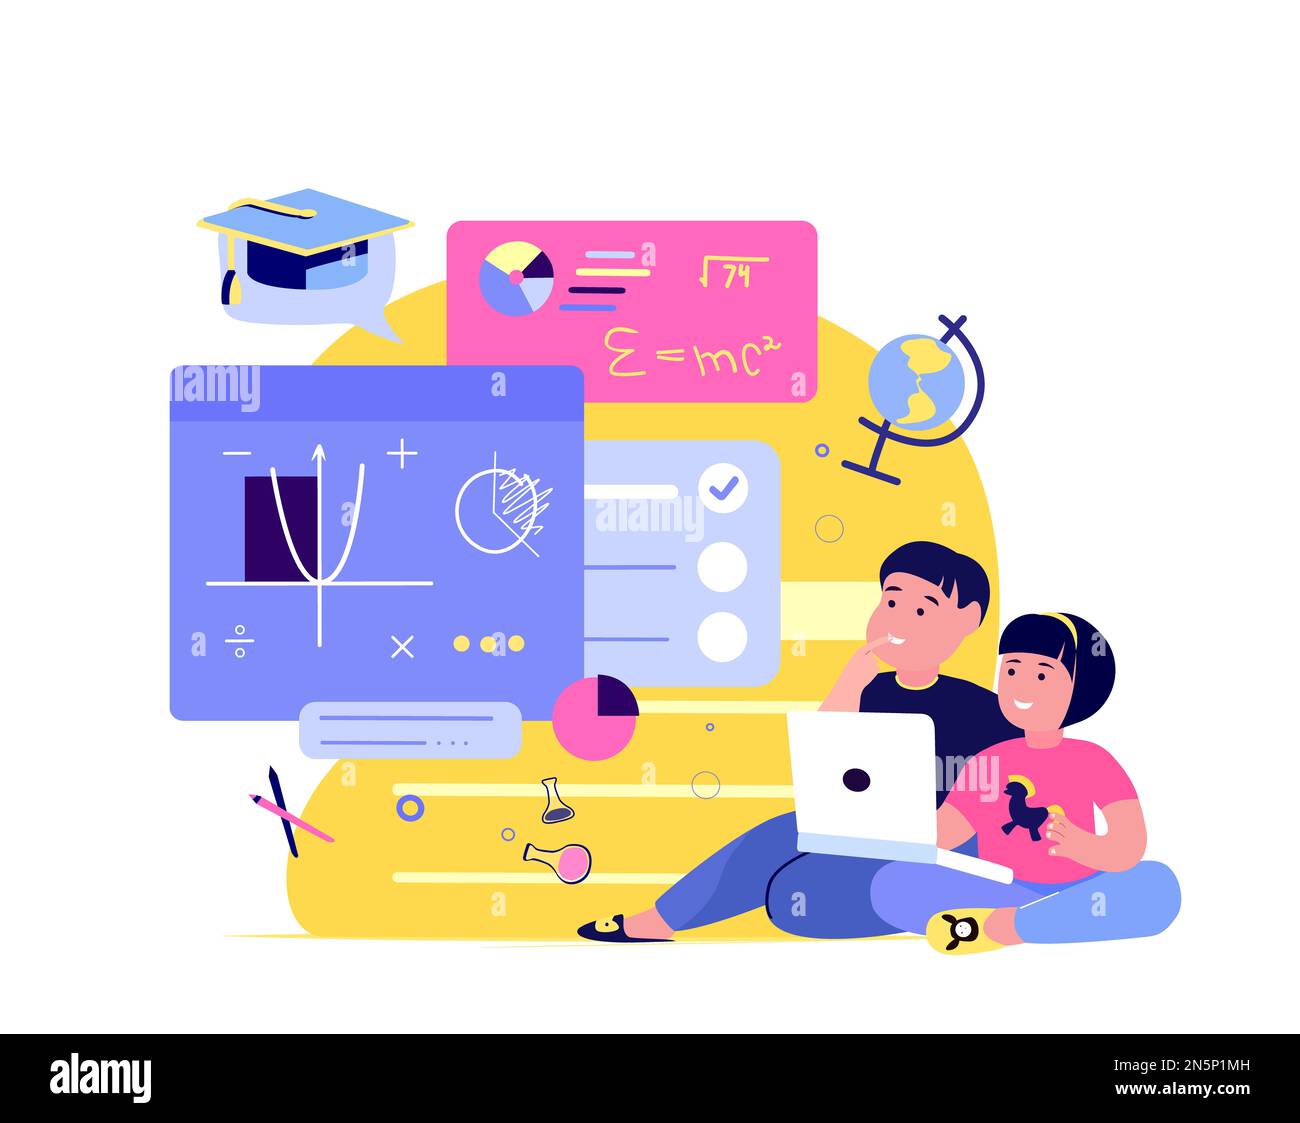 Remote Education.Online Digital Lesson Tutorial Education for Children.Schooling Website Knowledge for Pupil on Video Laptop.Clever Student Study.Home Stock Photo